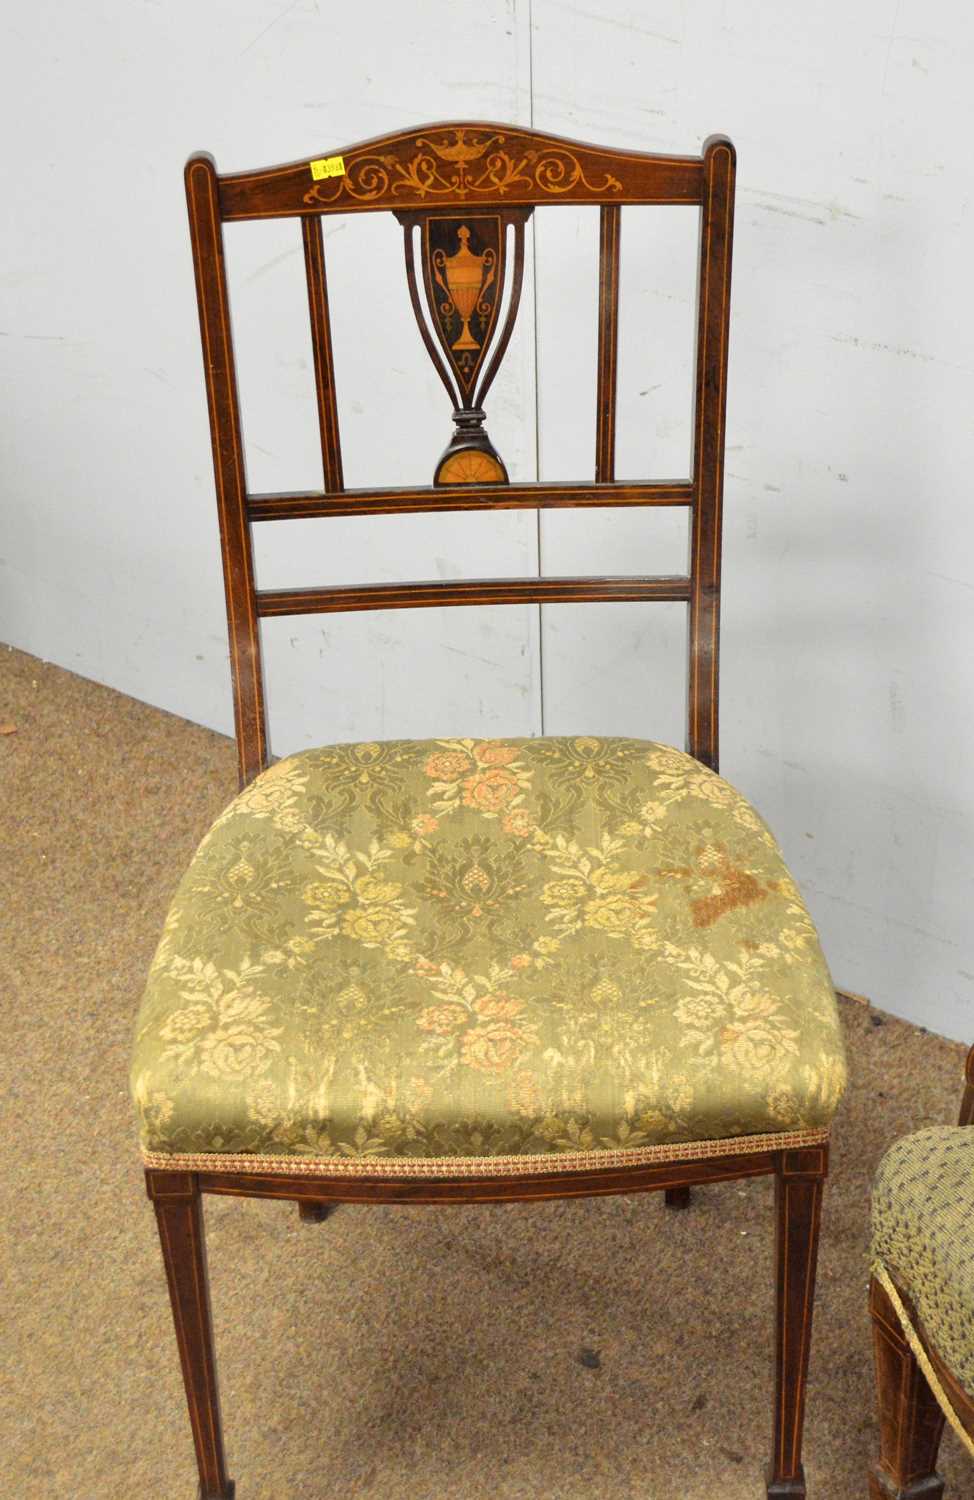 An Edwardian inlaid two seater settee and a salon chair - Image 3 of 5